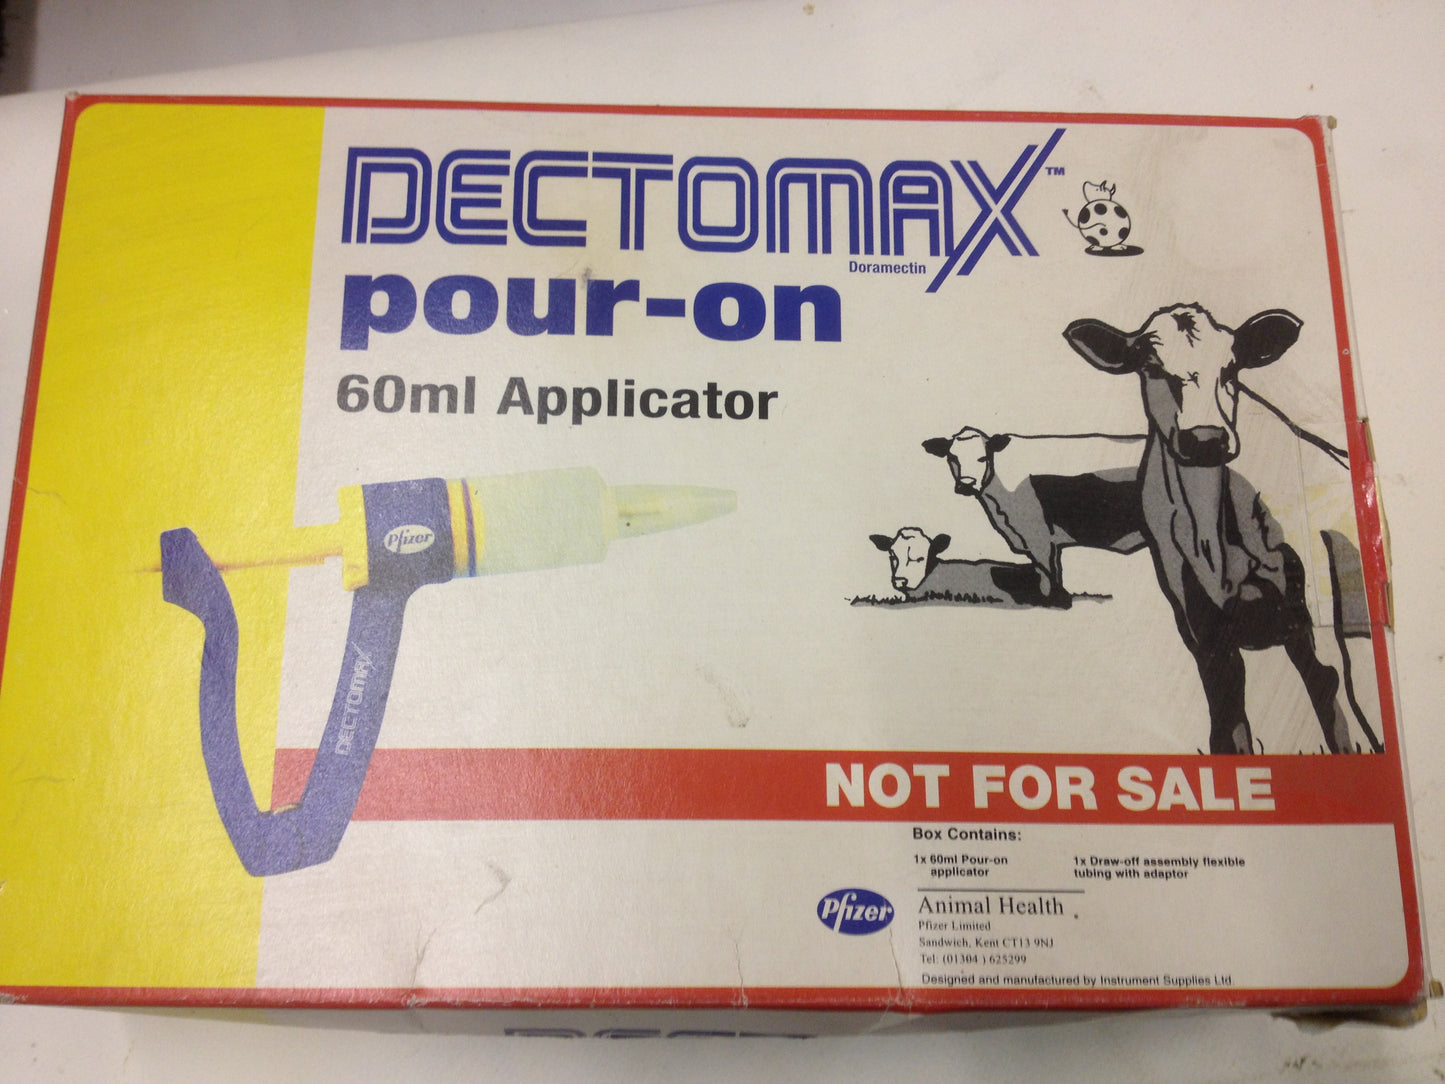 Dectomax Pour On 60m Applicator used